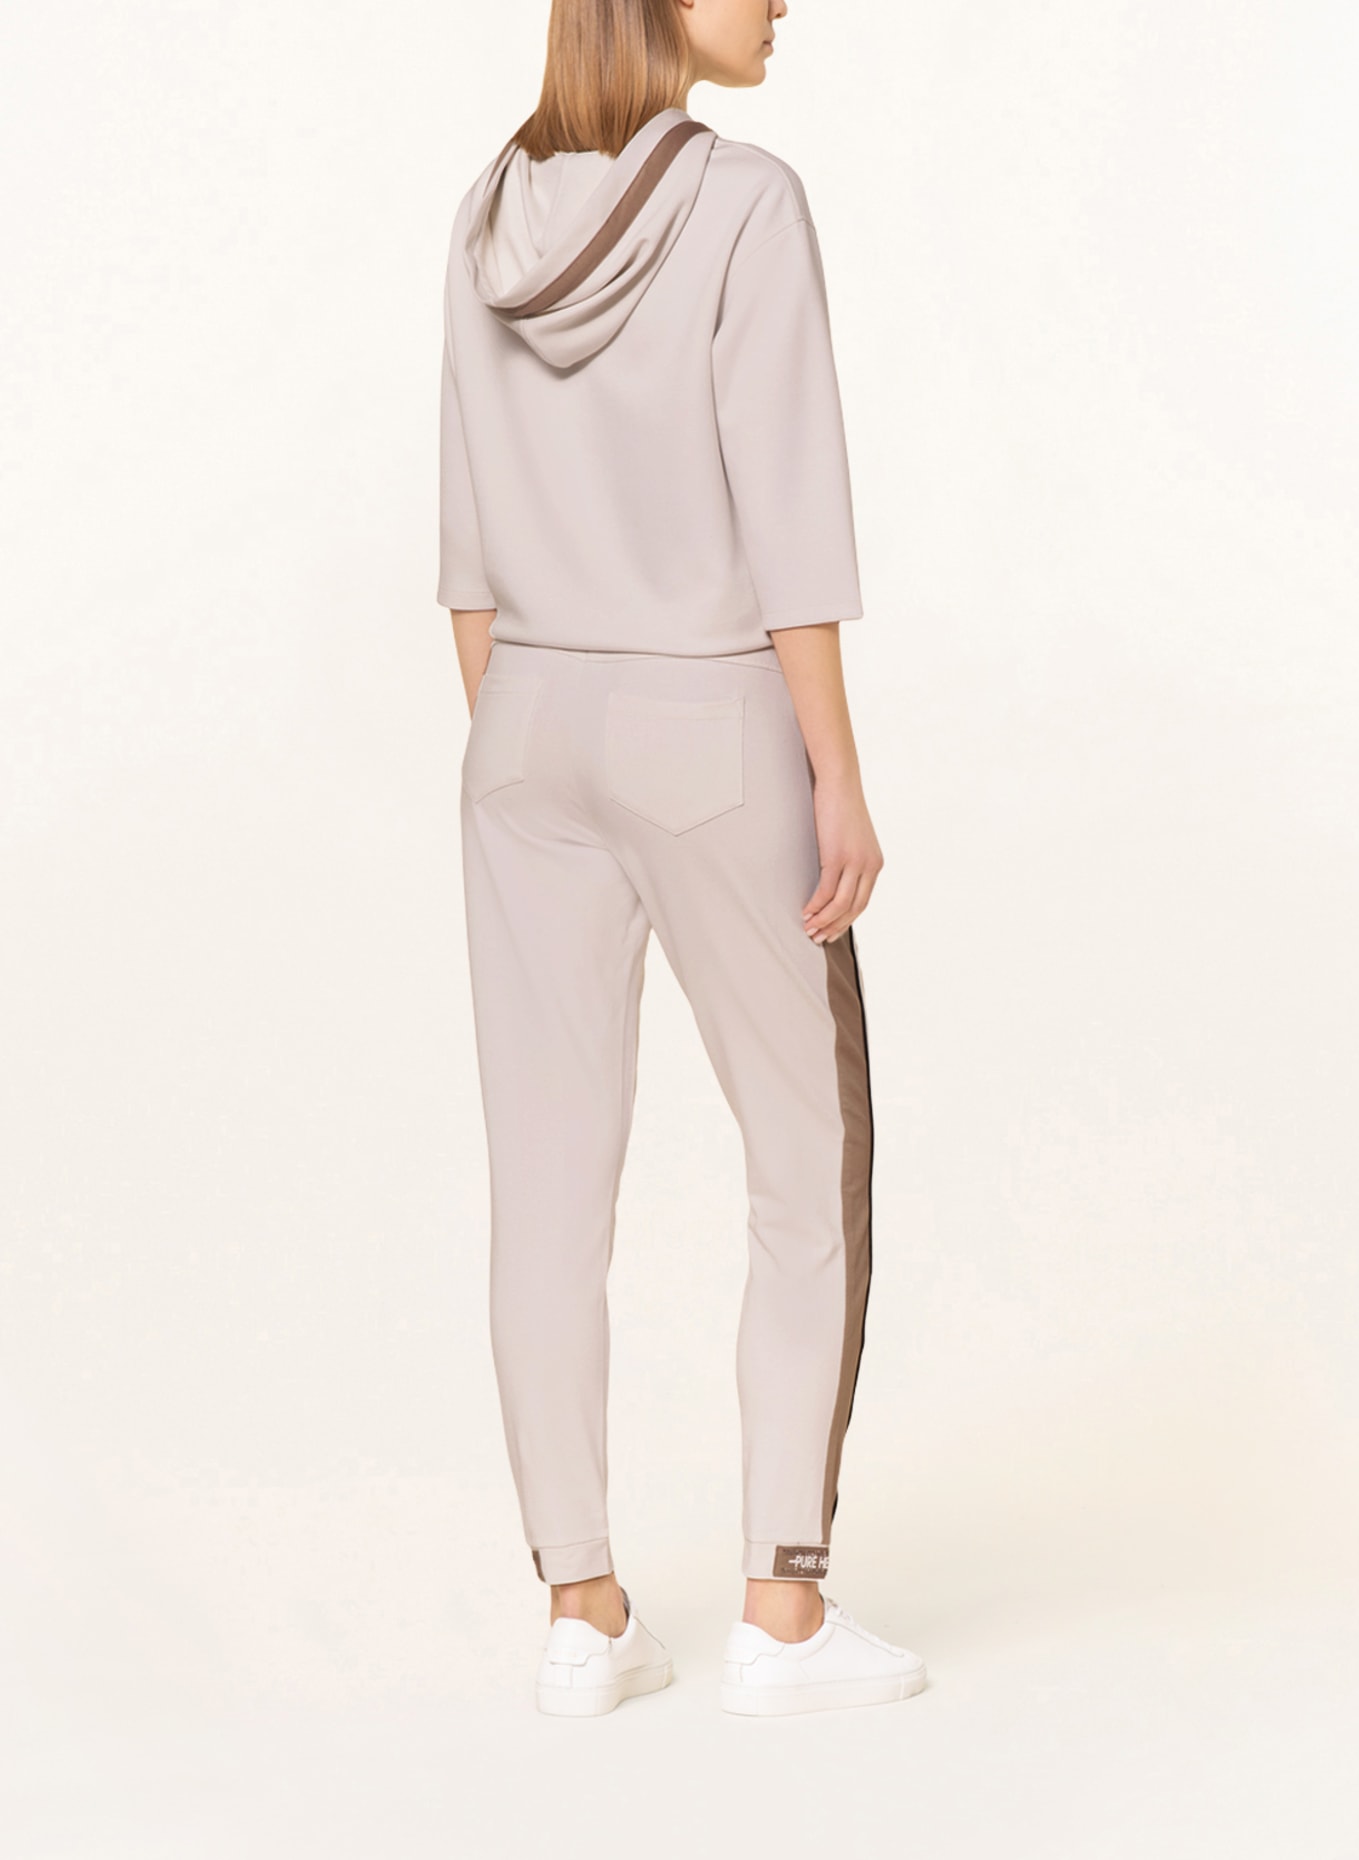 monari Pants in jogger style with tuxedo stripes, Color: CREAM/ BEIGE (Image 3)